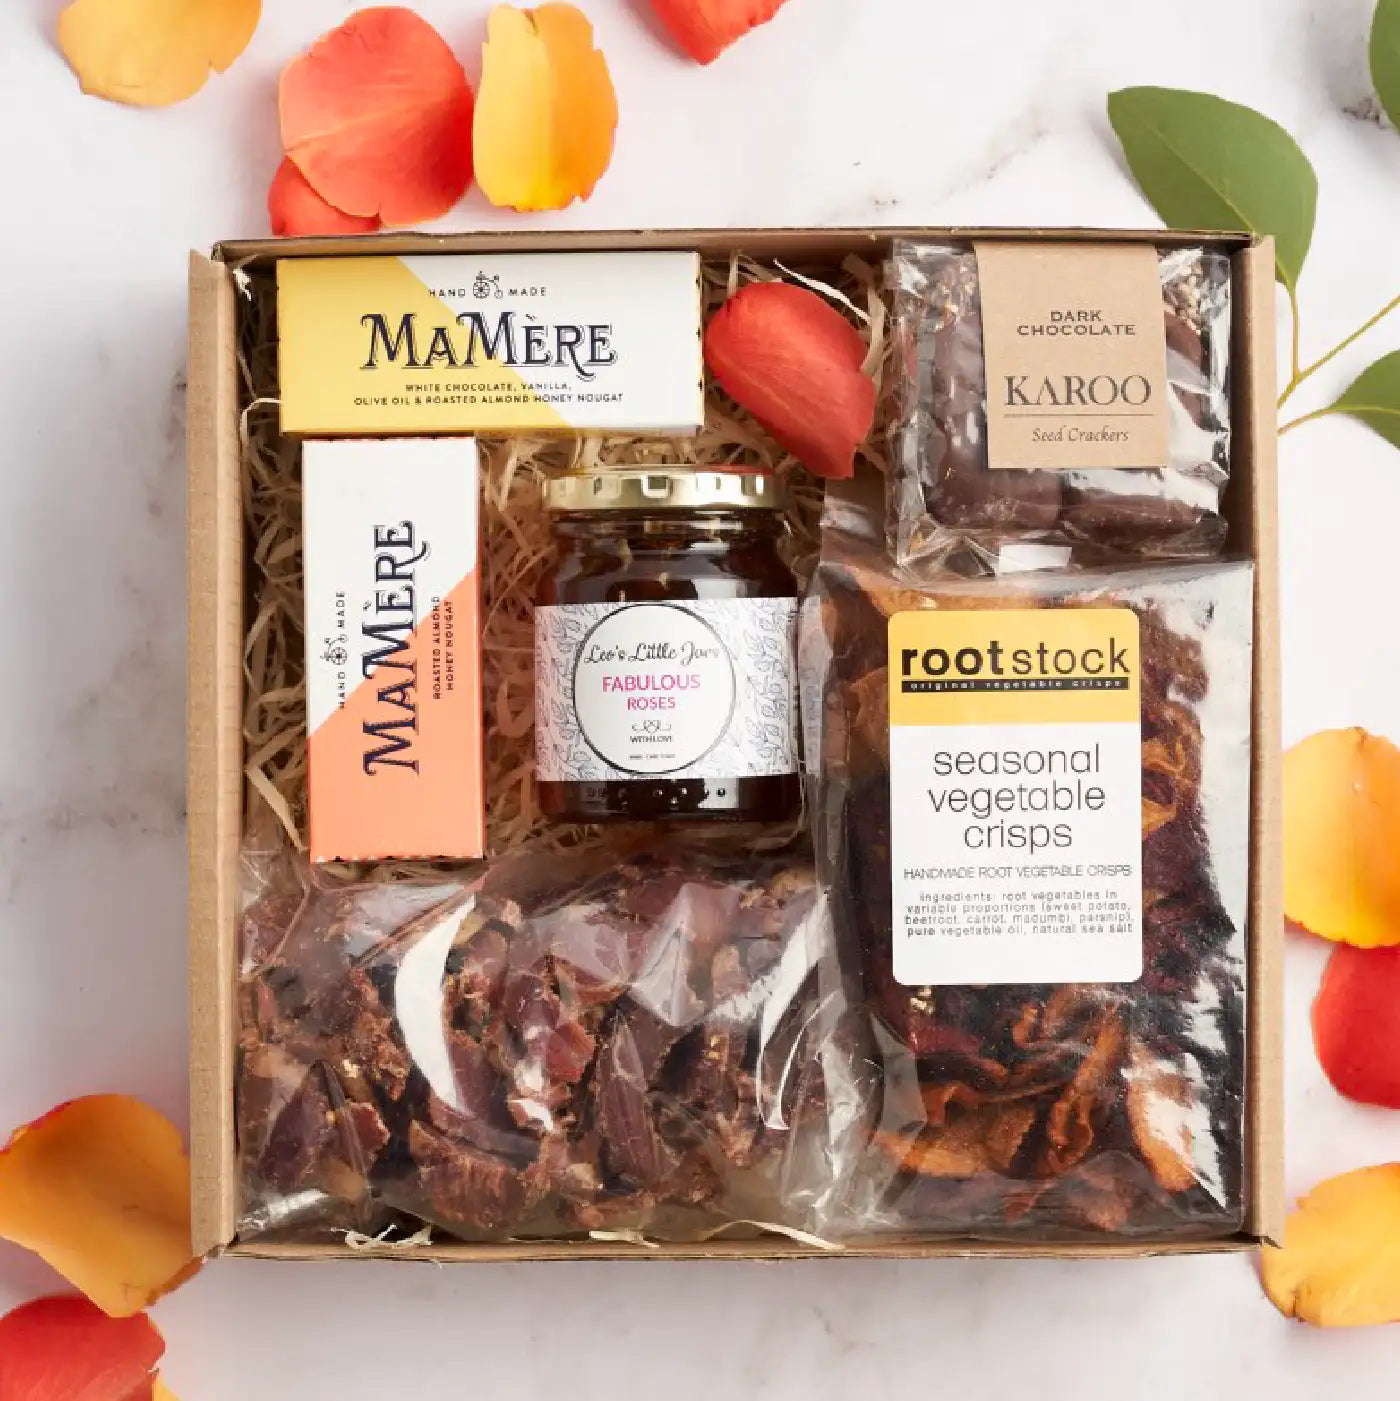 A curated business gifting box featuring gourmet items including MaMère nougat, seasonal vegetable crisps, dark chocolate seed crackers, a jar of rose jam, and biltong, elegantly arranged with decorative rose petals. Fabulous Flowers and Gifts.